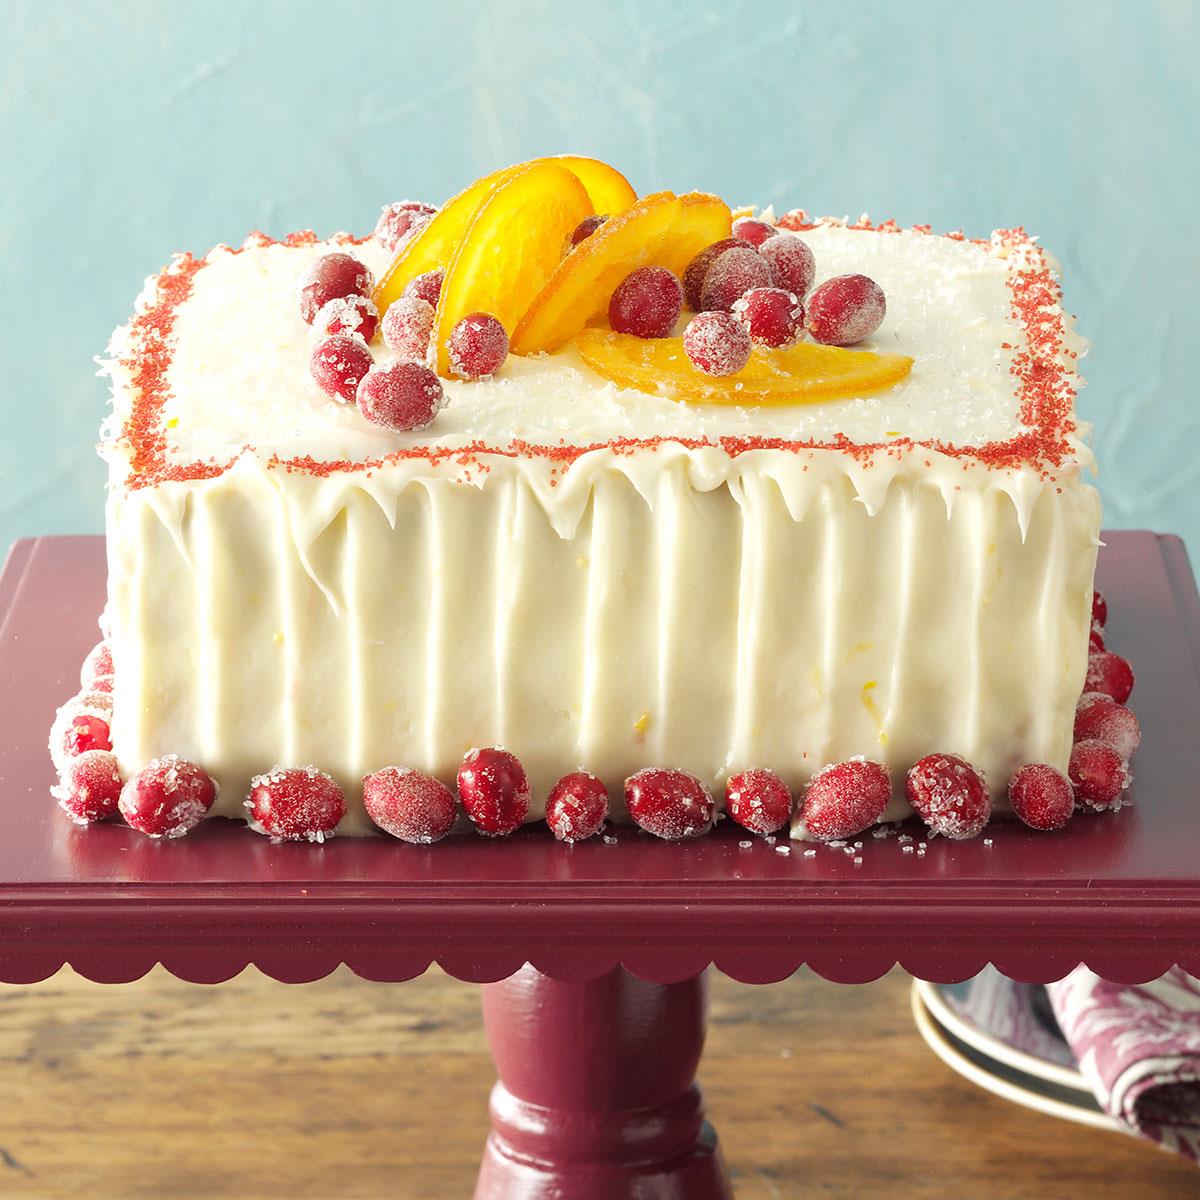 Cranberry Cake with Tangerine Frosting image